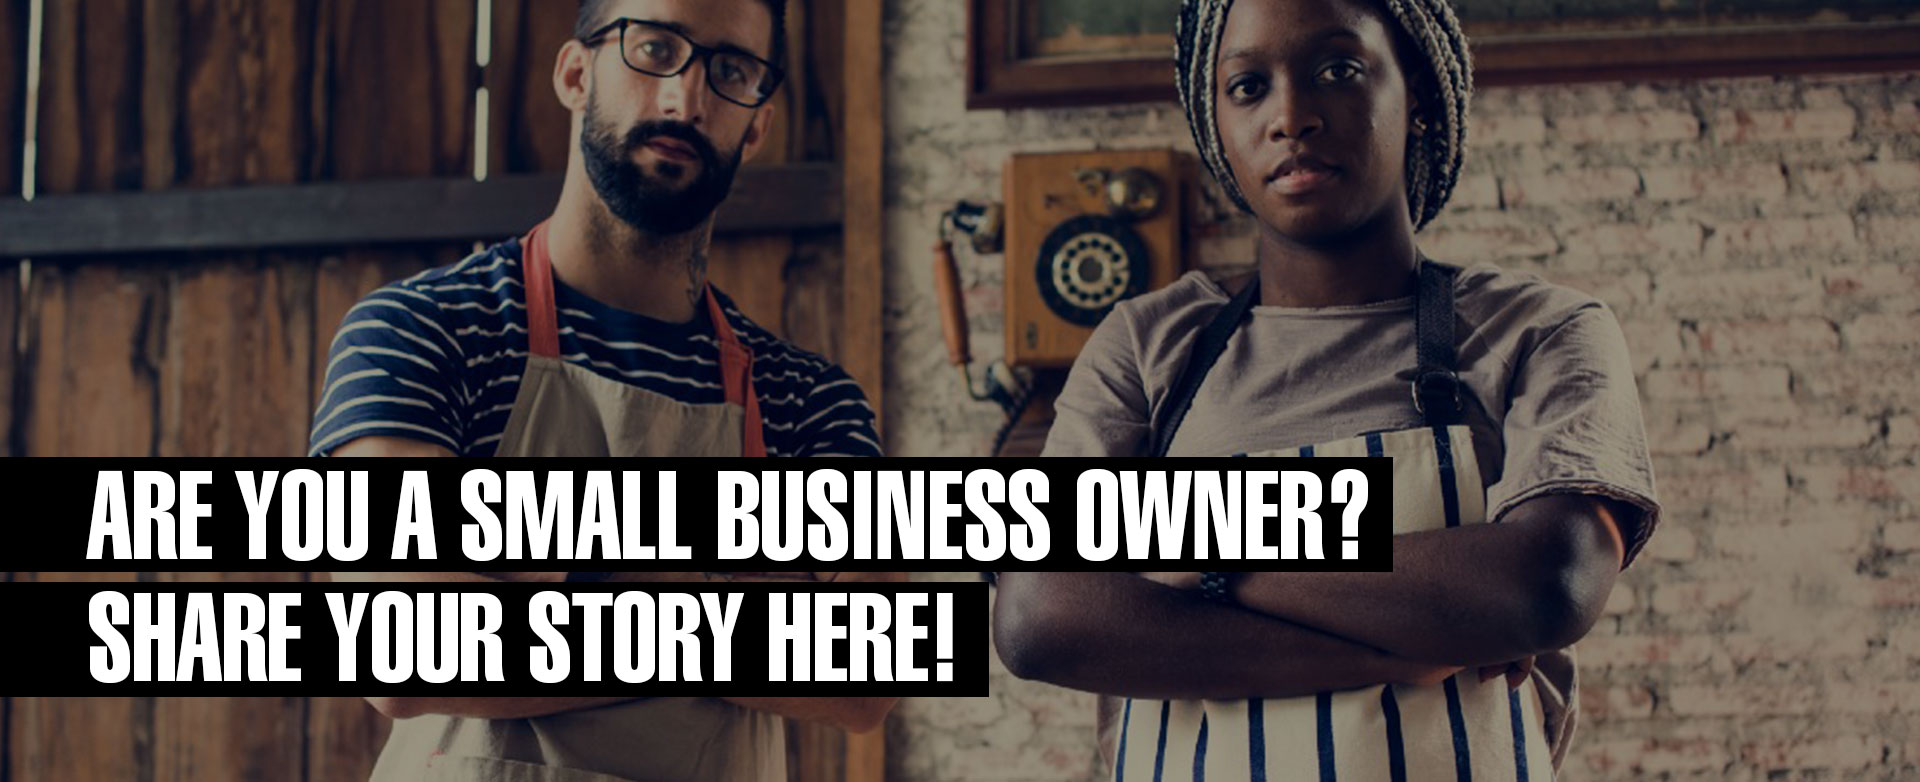 MyPariotsNetwork-Are You A Small Business Owner? Share Your Story Here!